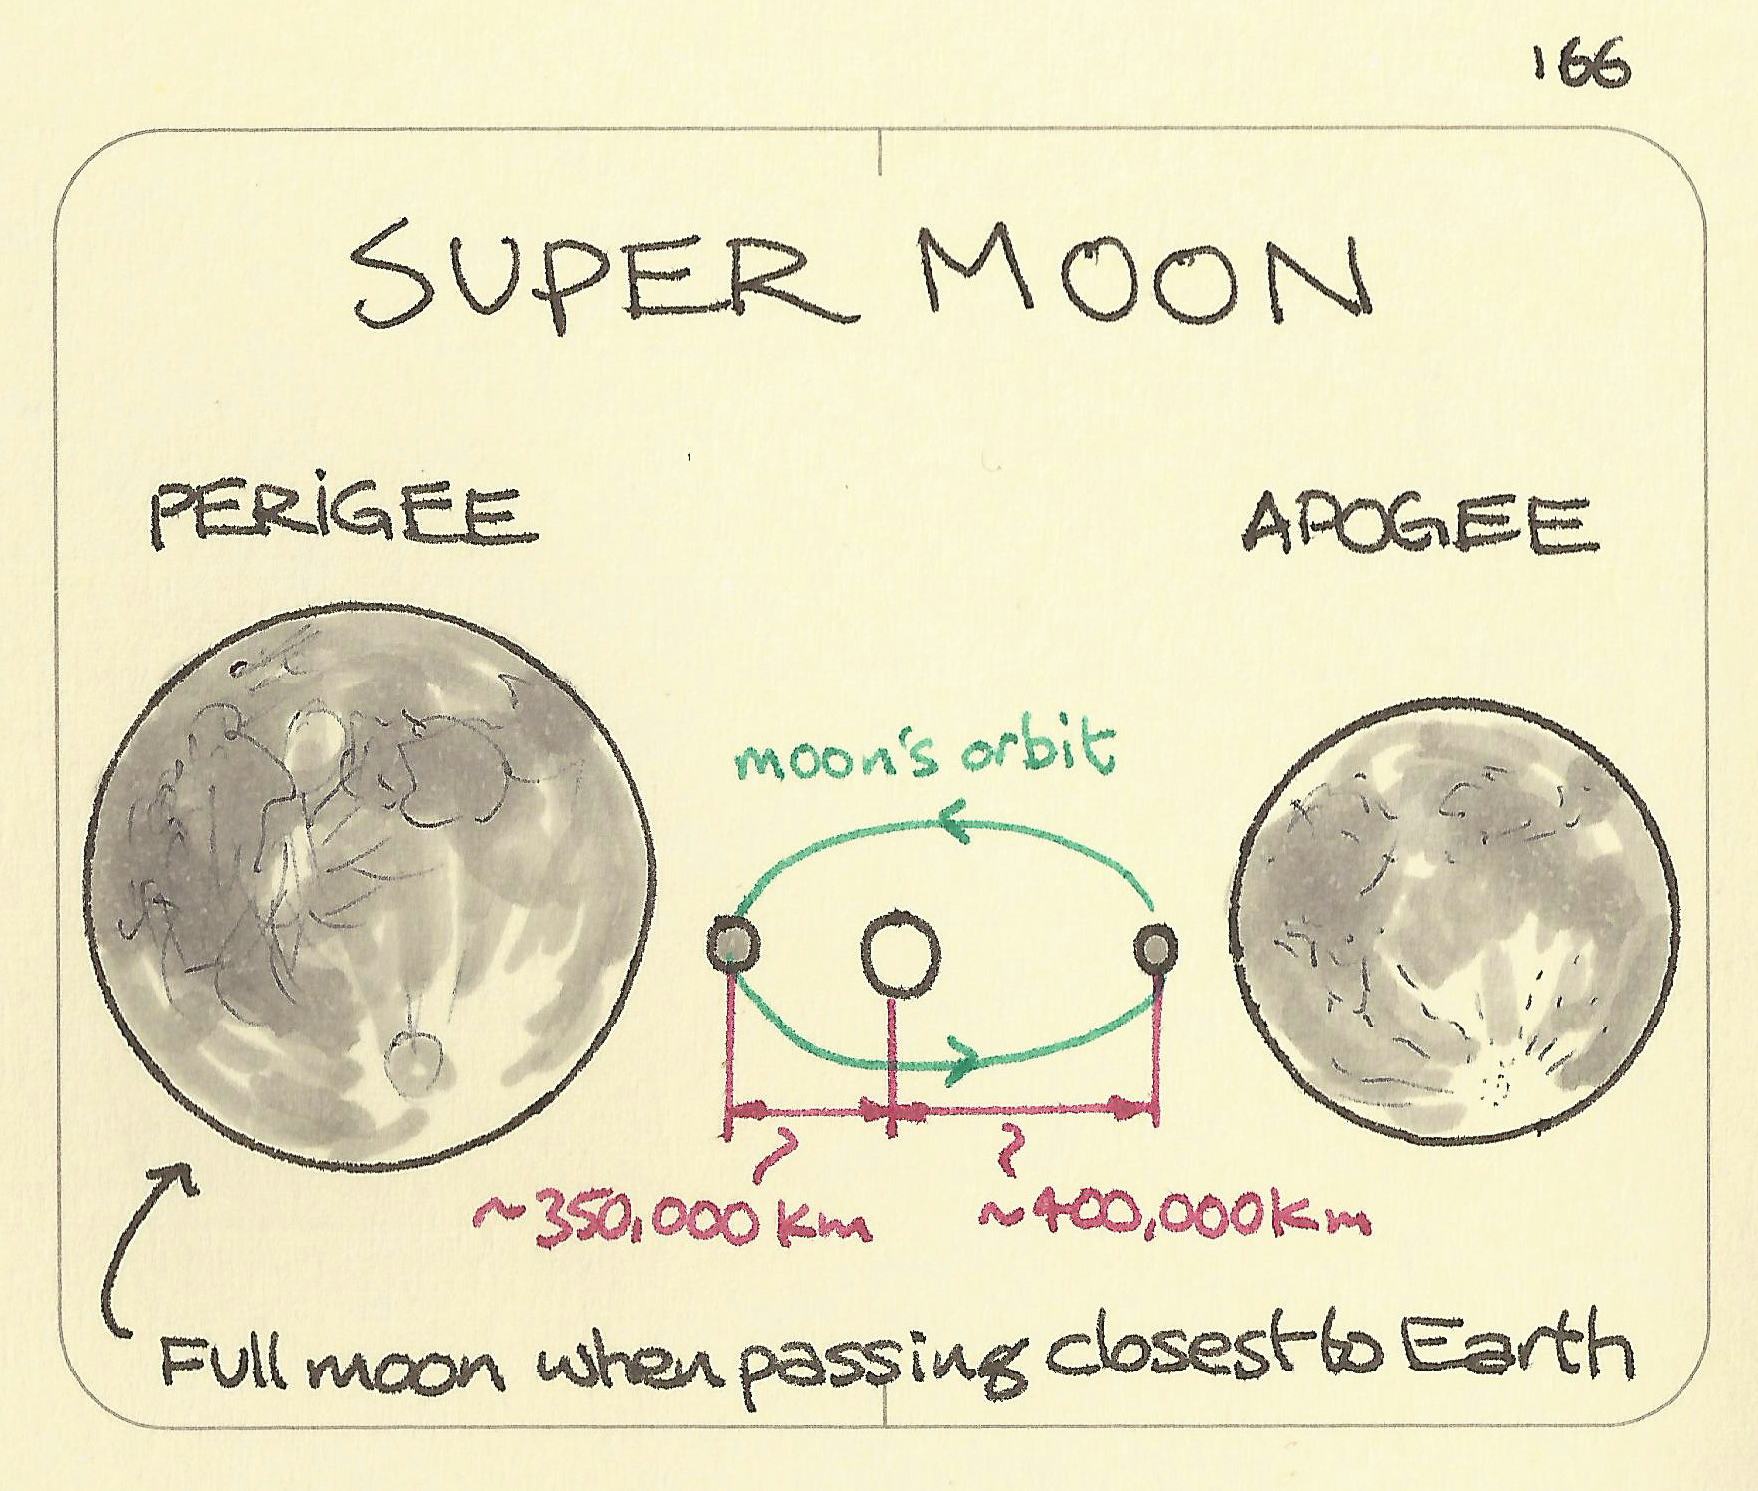 Supermoon illustration: showing the moon large at its perigee, when it is closet to Earth, and smaller at it's apogee, when it's furthest from Earth